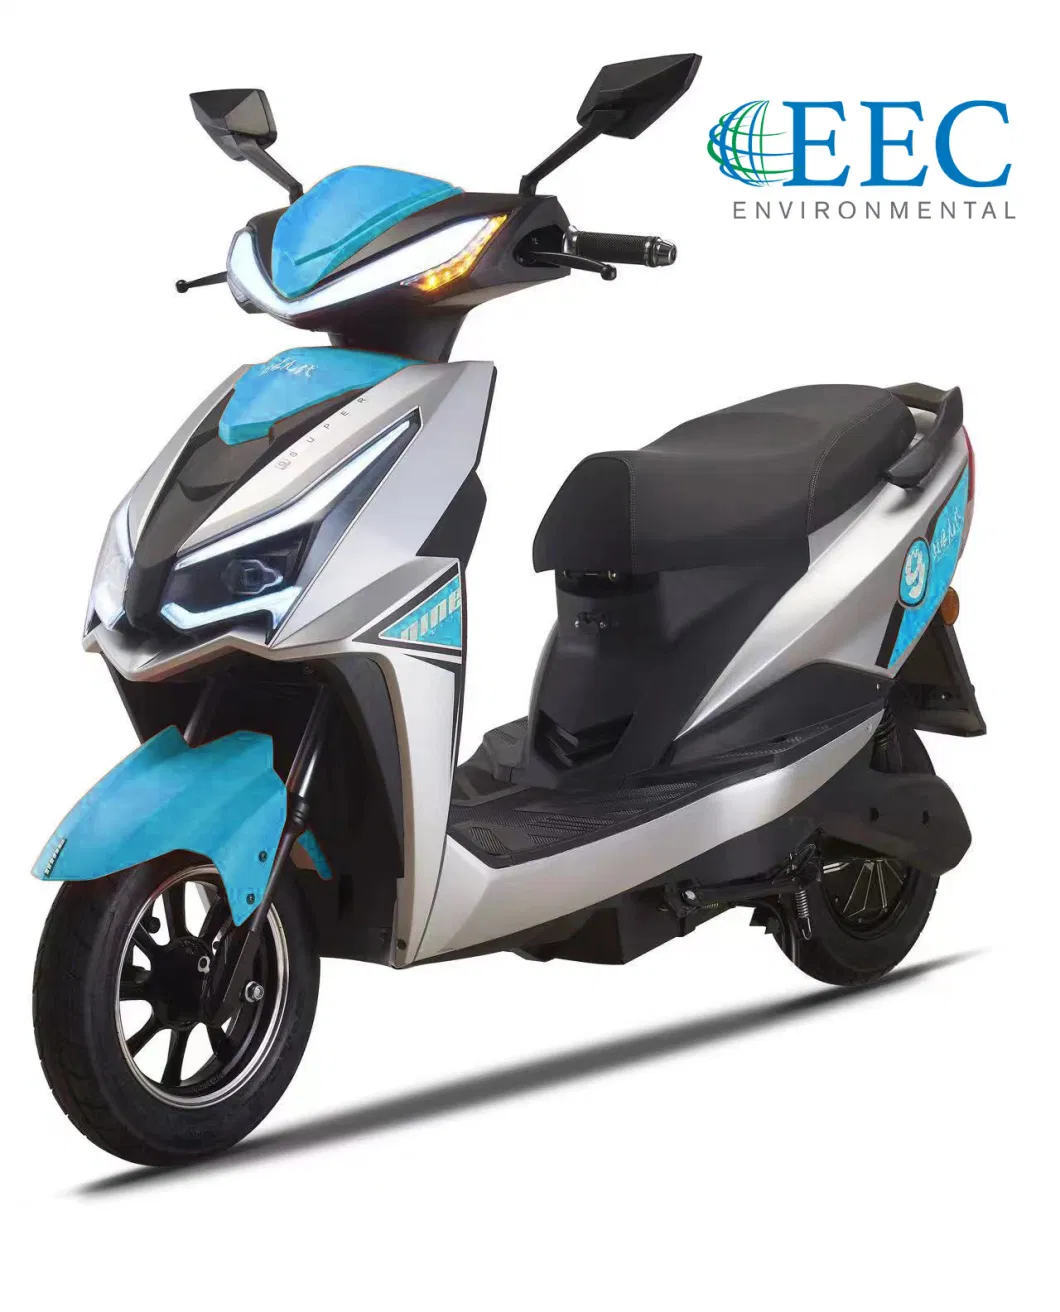 Long Range off Road Electric Scooter EEC L3e Electric Motorcycle Scooter for Adult Electric Bike Motorcycles Stealth Bomber